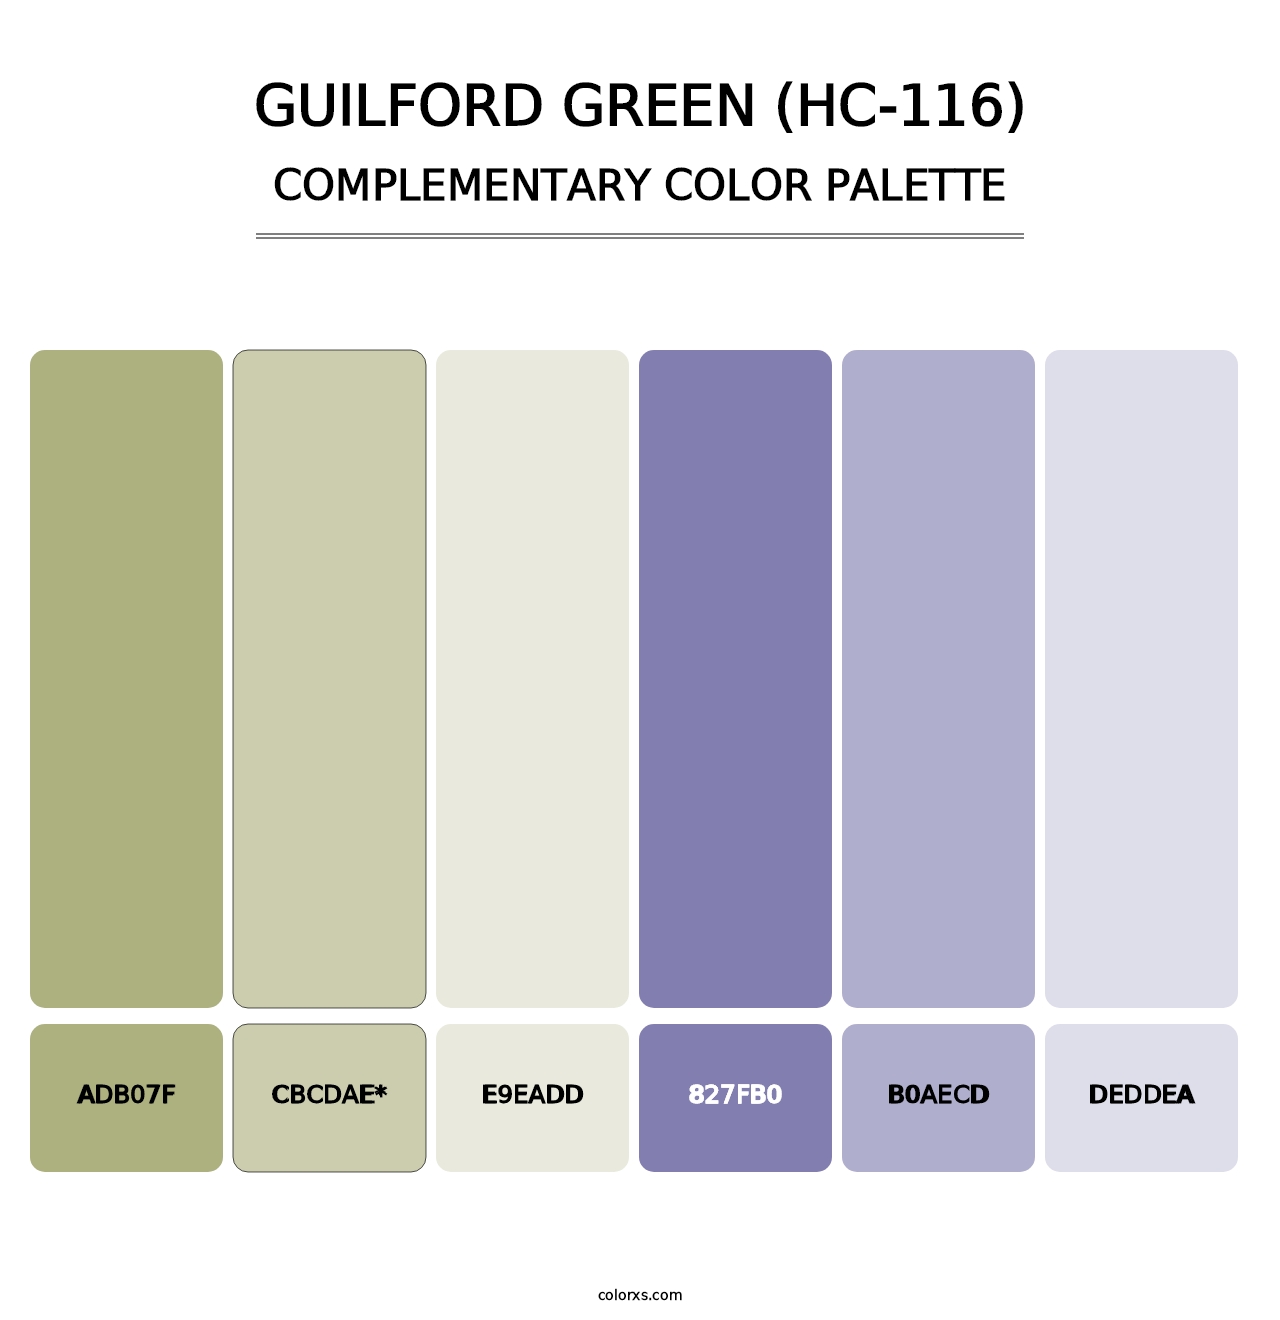 Guilford Green (HC-116) - Complementary Color Palette